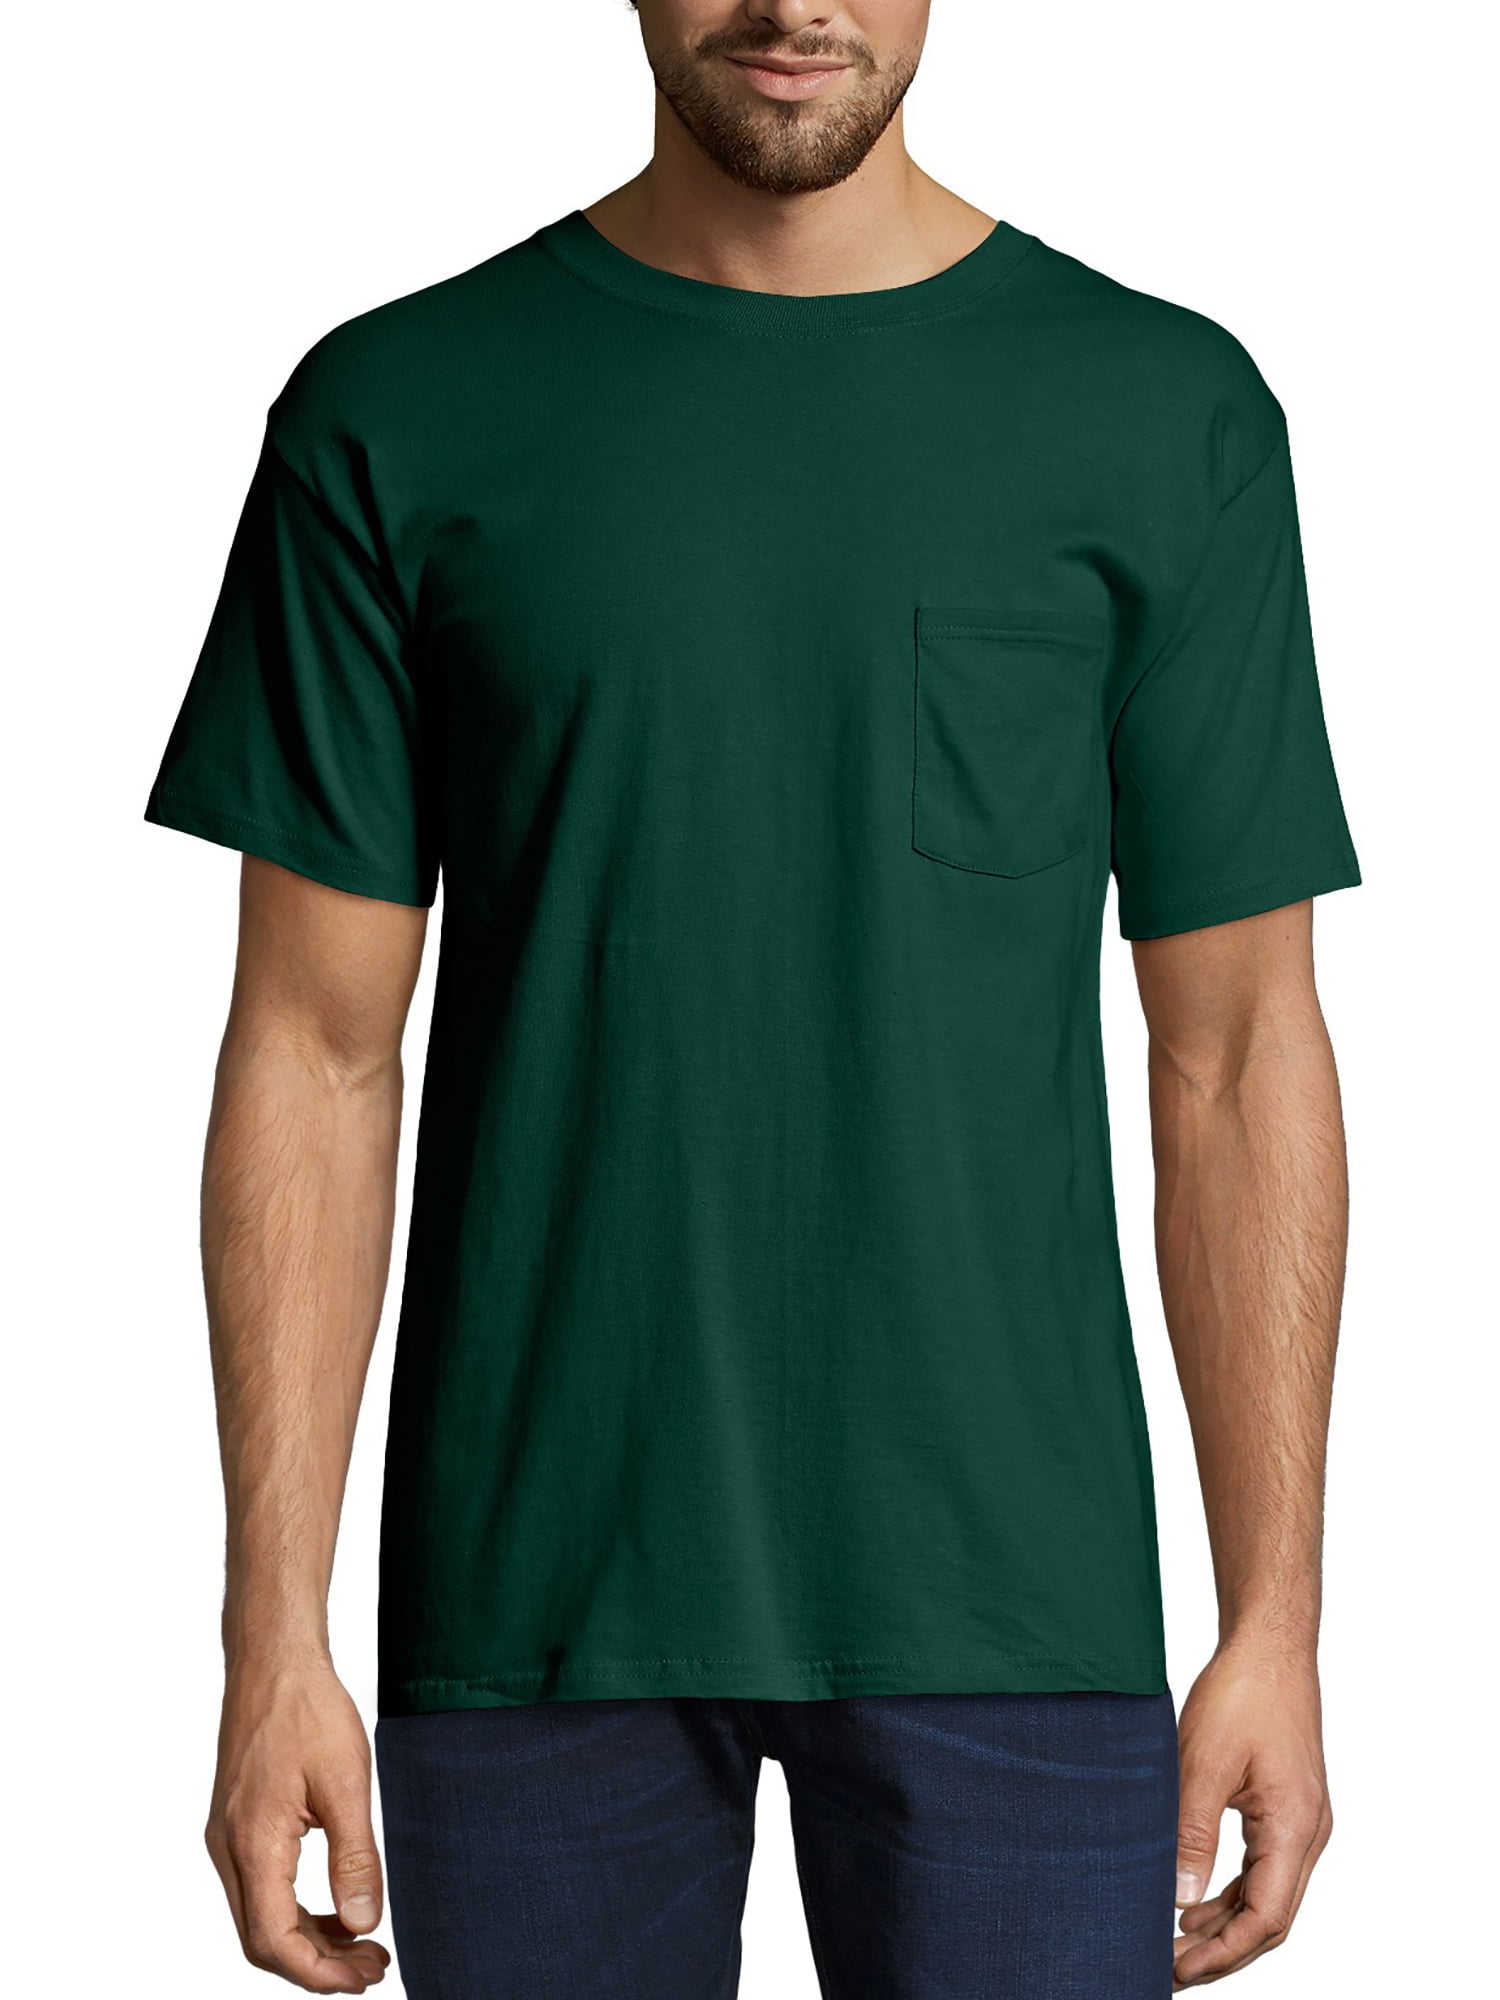 Hanes Men's Premium Beefy-T Short Sleeve T-Shirt With Pocket, up to 3XL ...